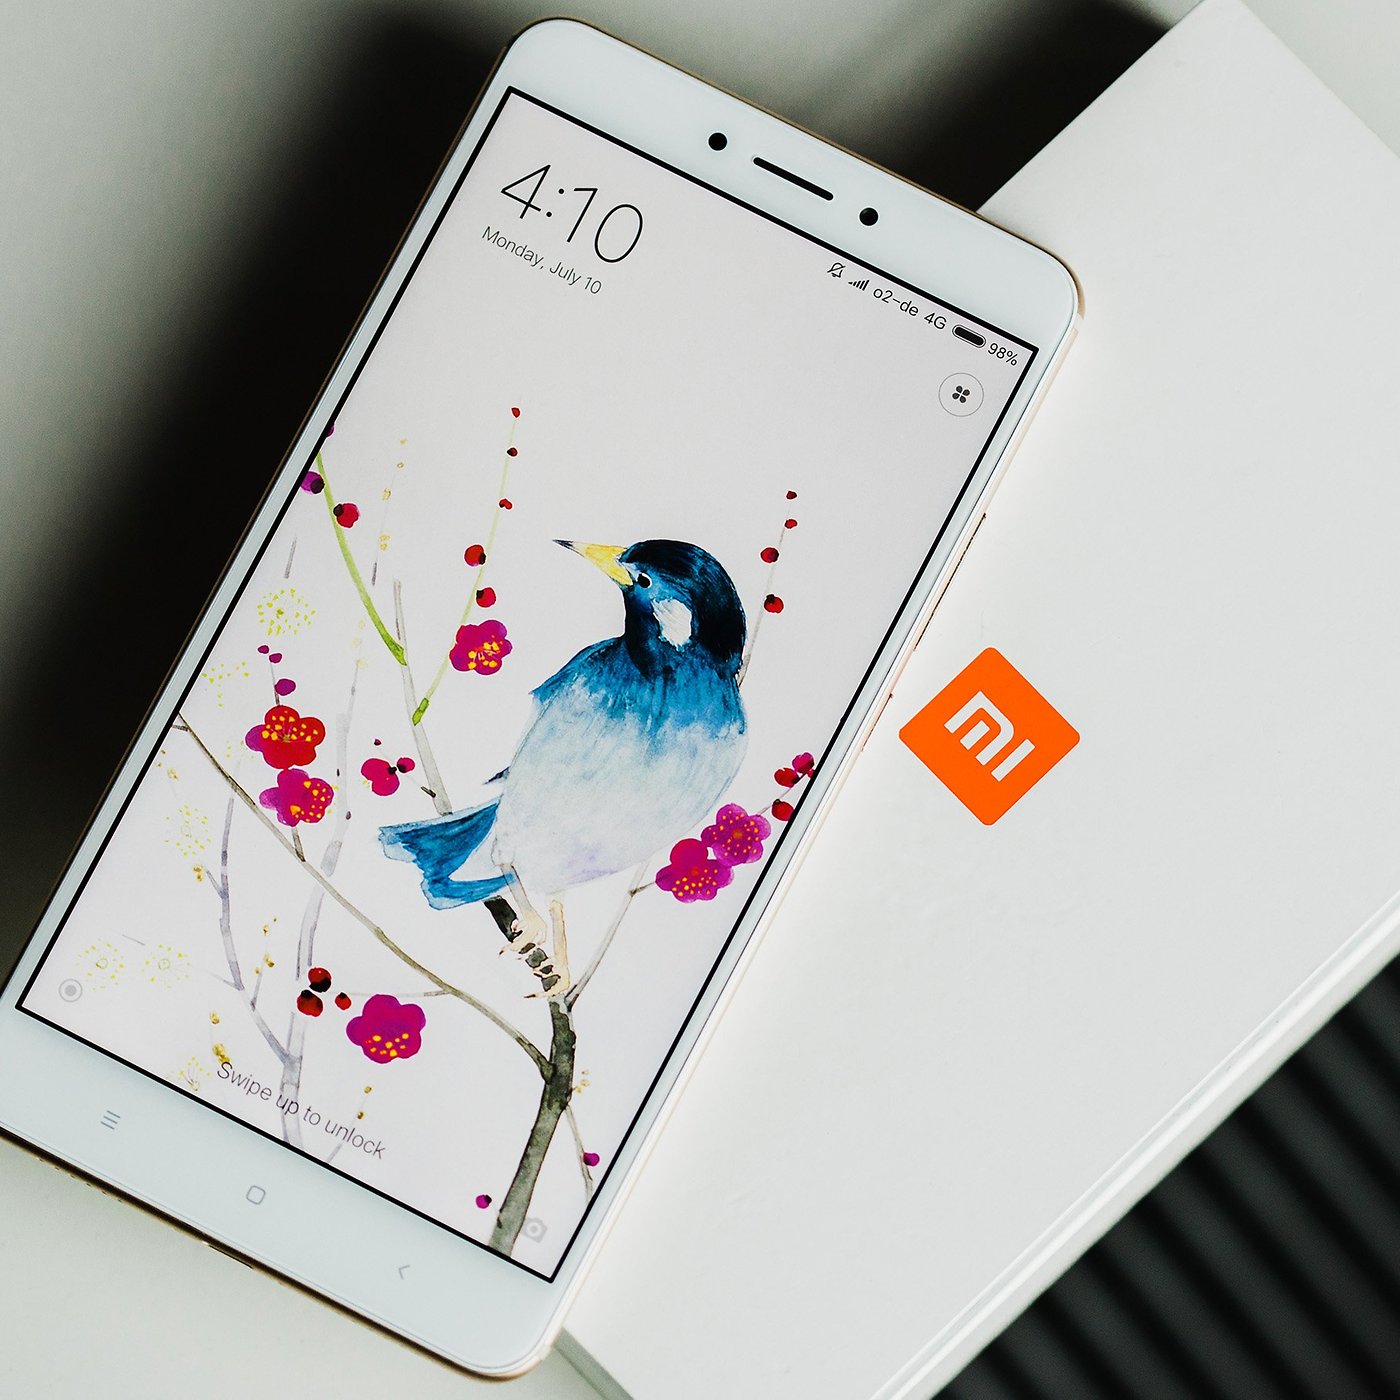 Xiaomi Mi Max 2 review: you need this if you're a fan of 